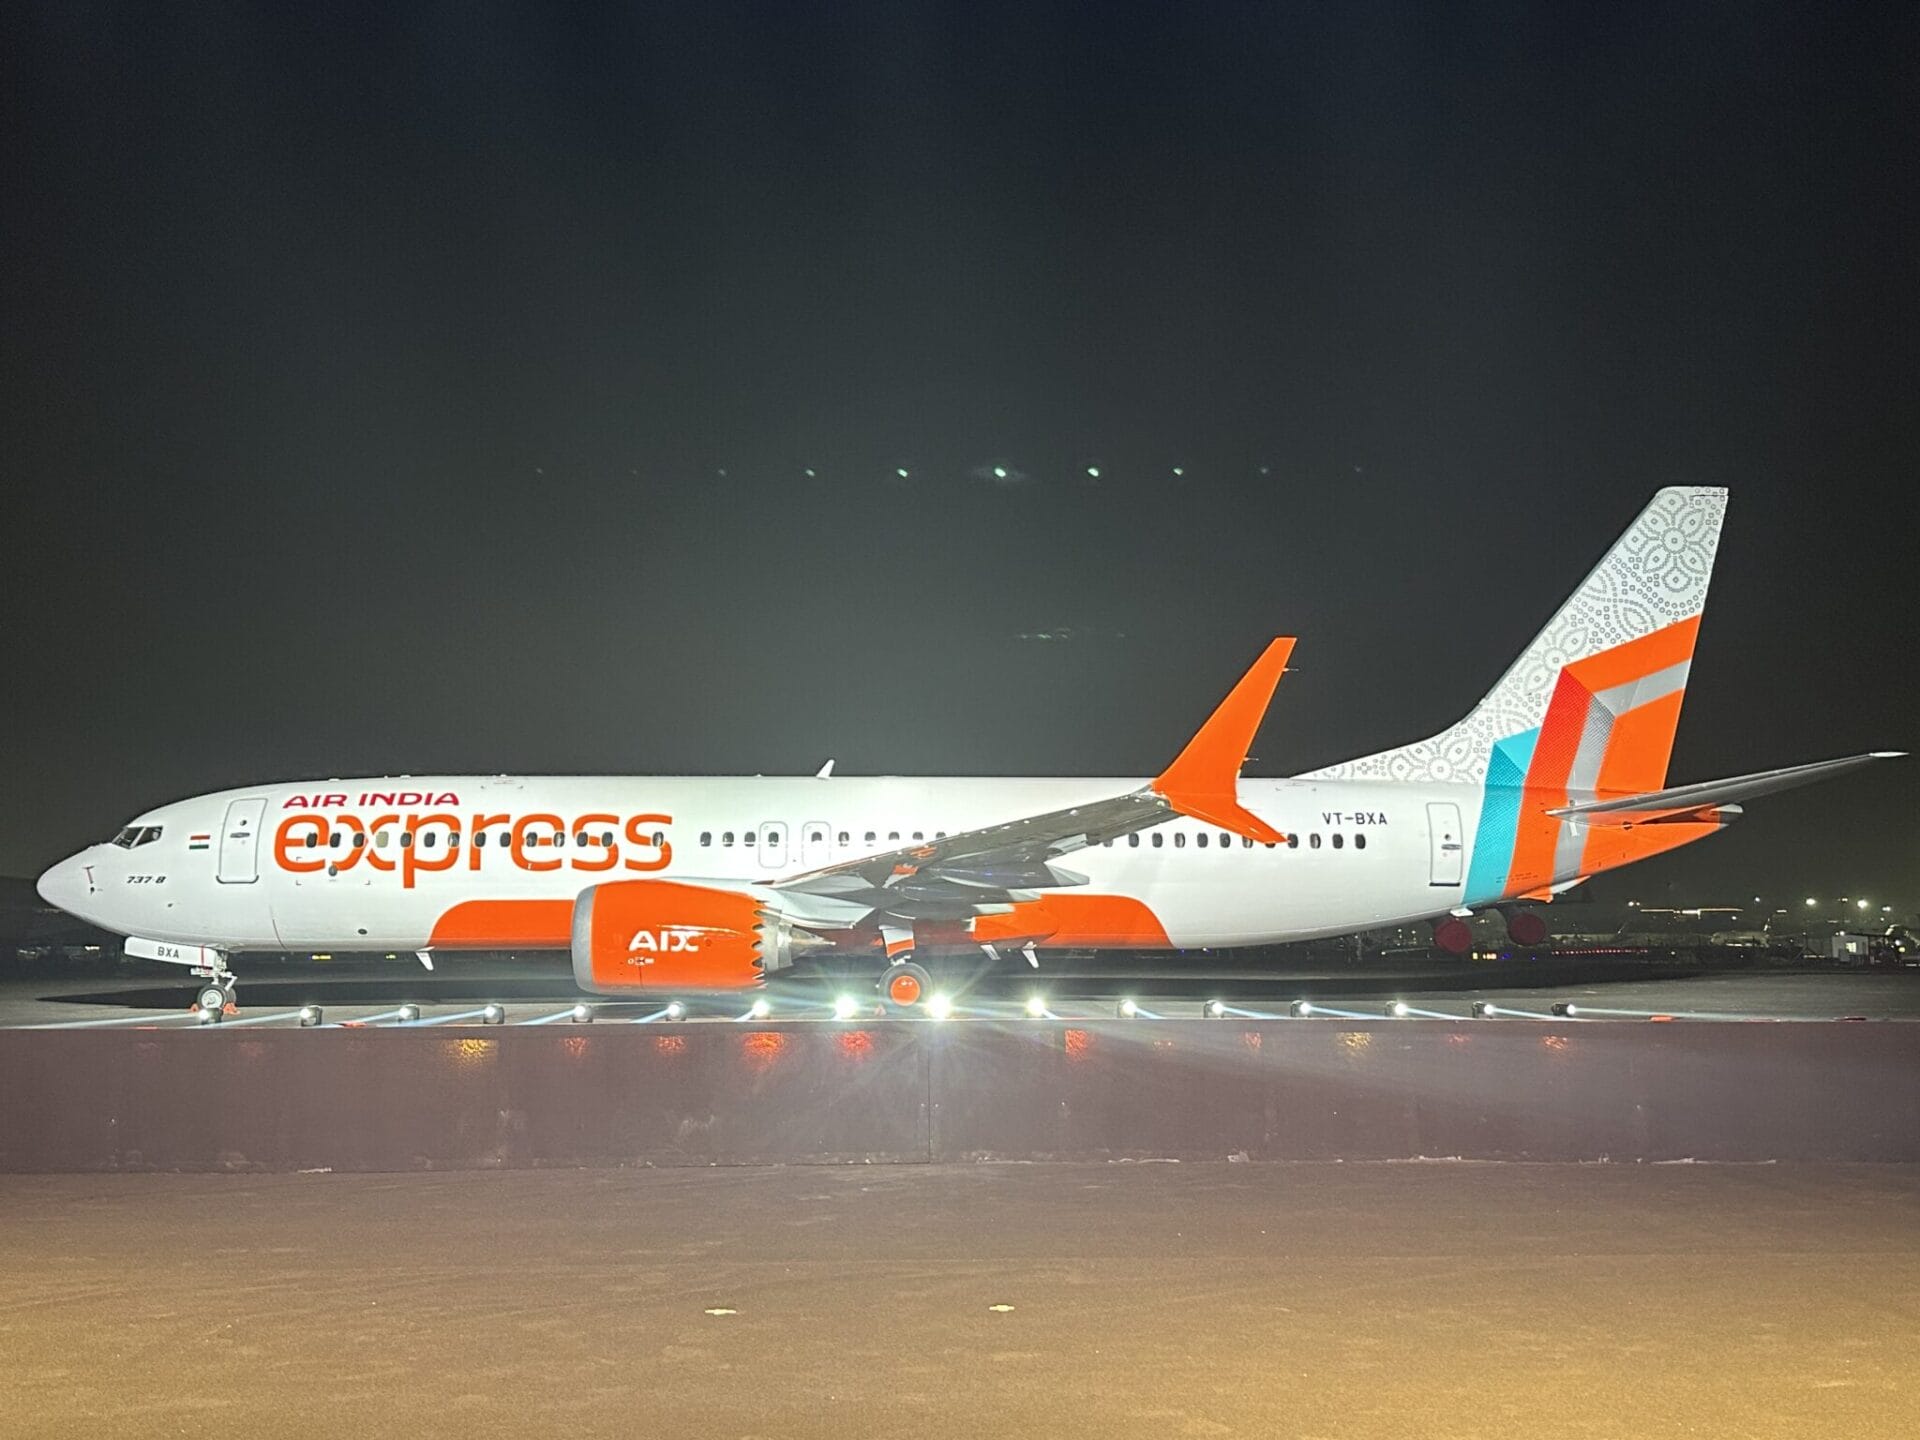 Air India Express to launch inaugural flight from Delhi to Ayodhya on Dec 30